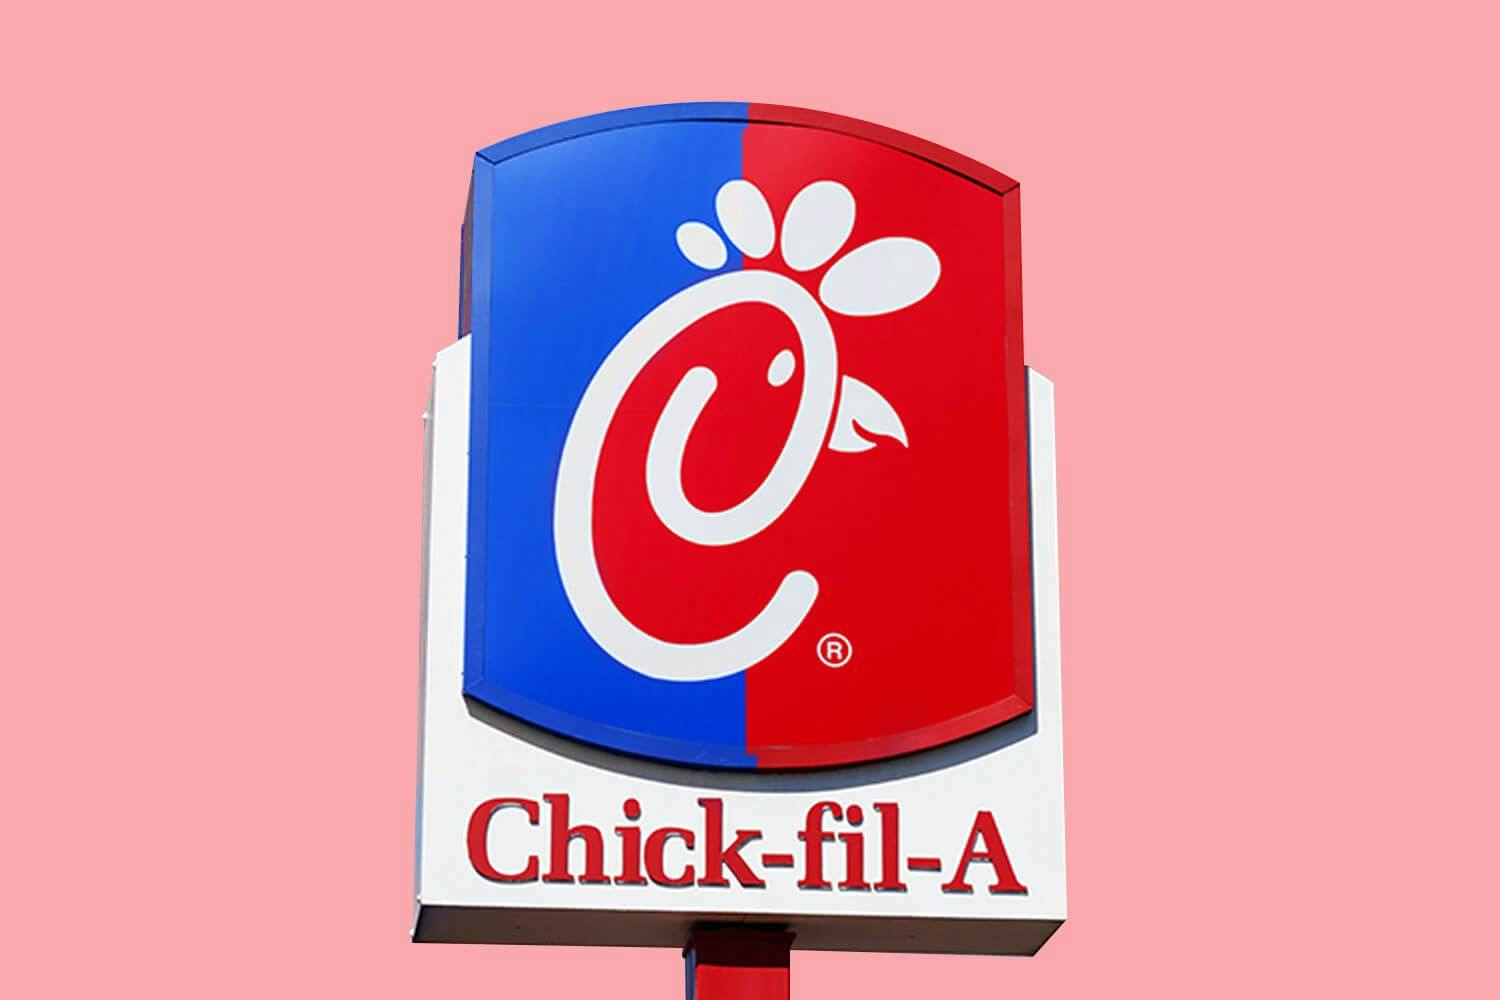 A Chick-fil-A sign that is turning blue 